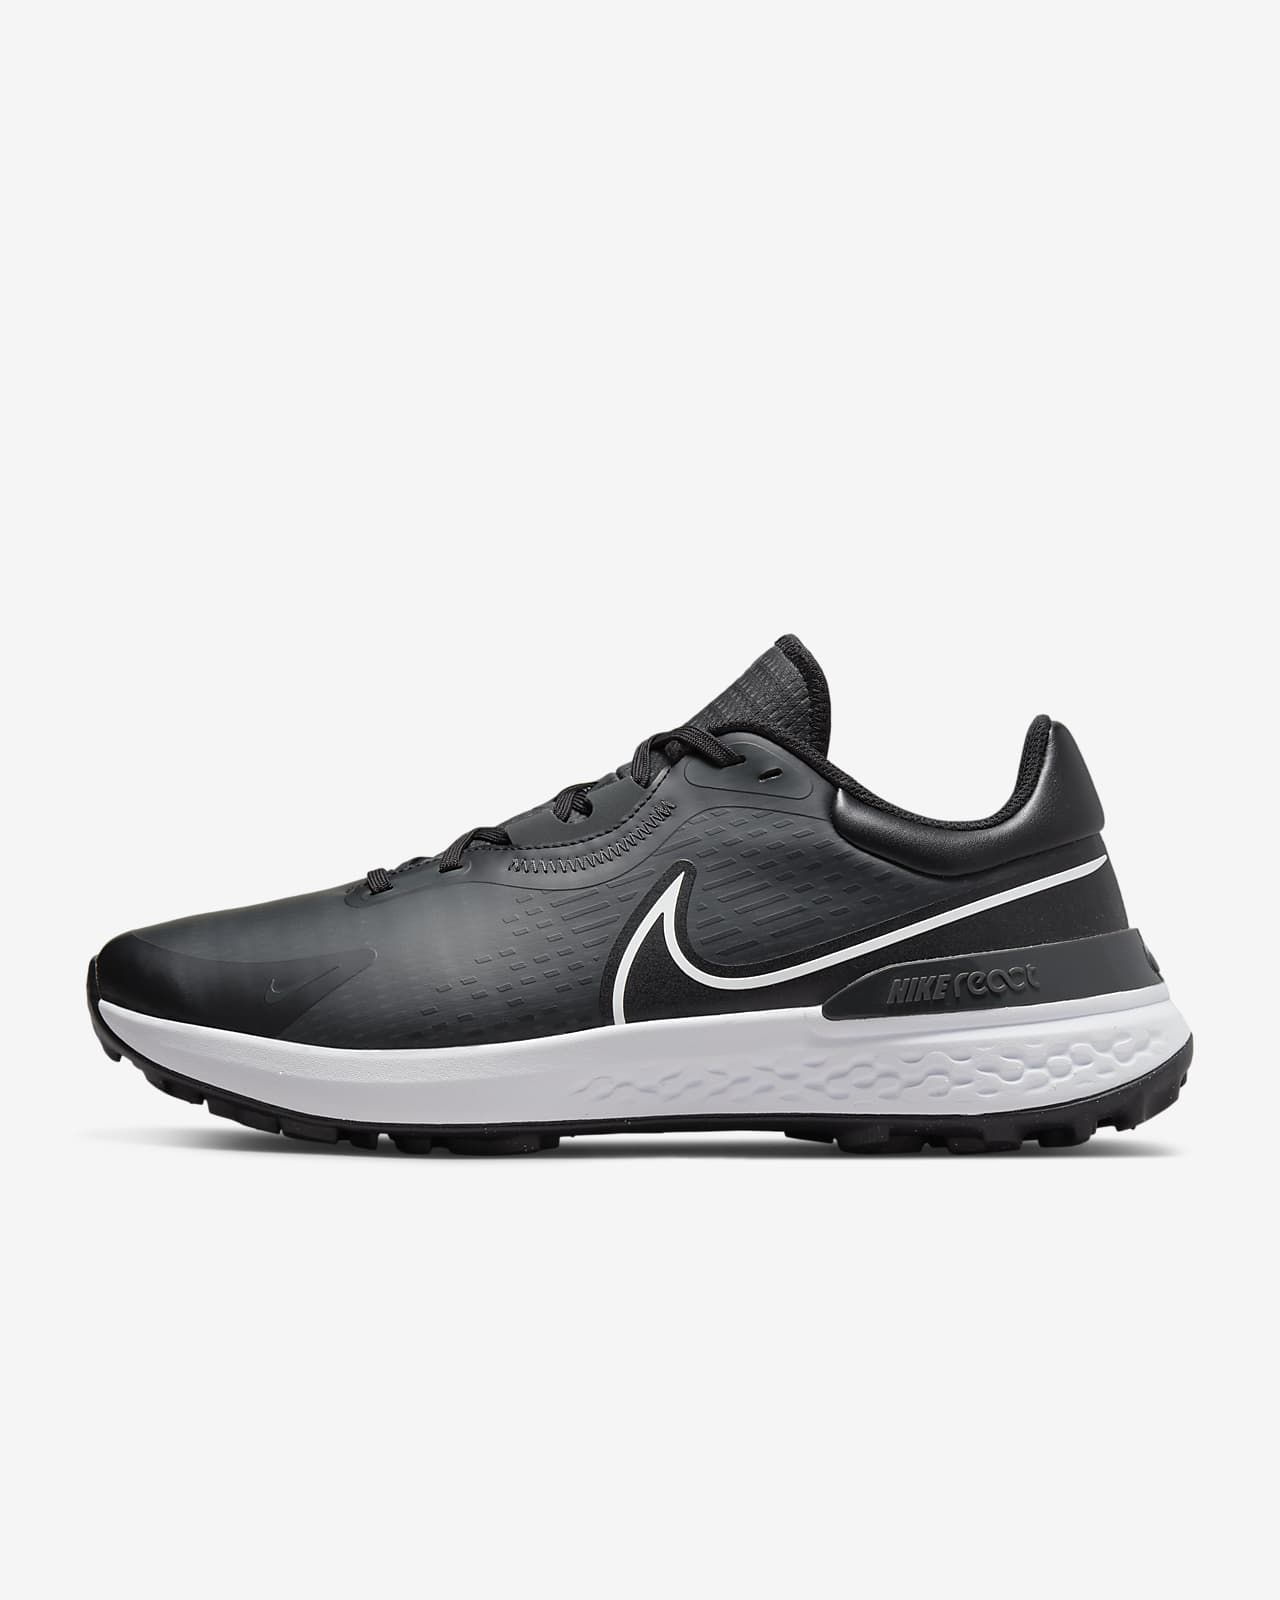 Nike Infinity Pro 2 Golf Shoes (Wide).